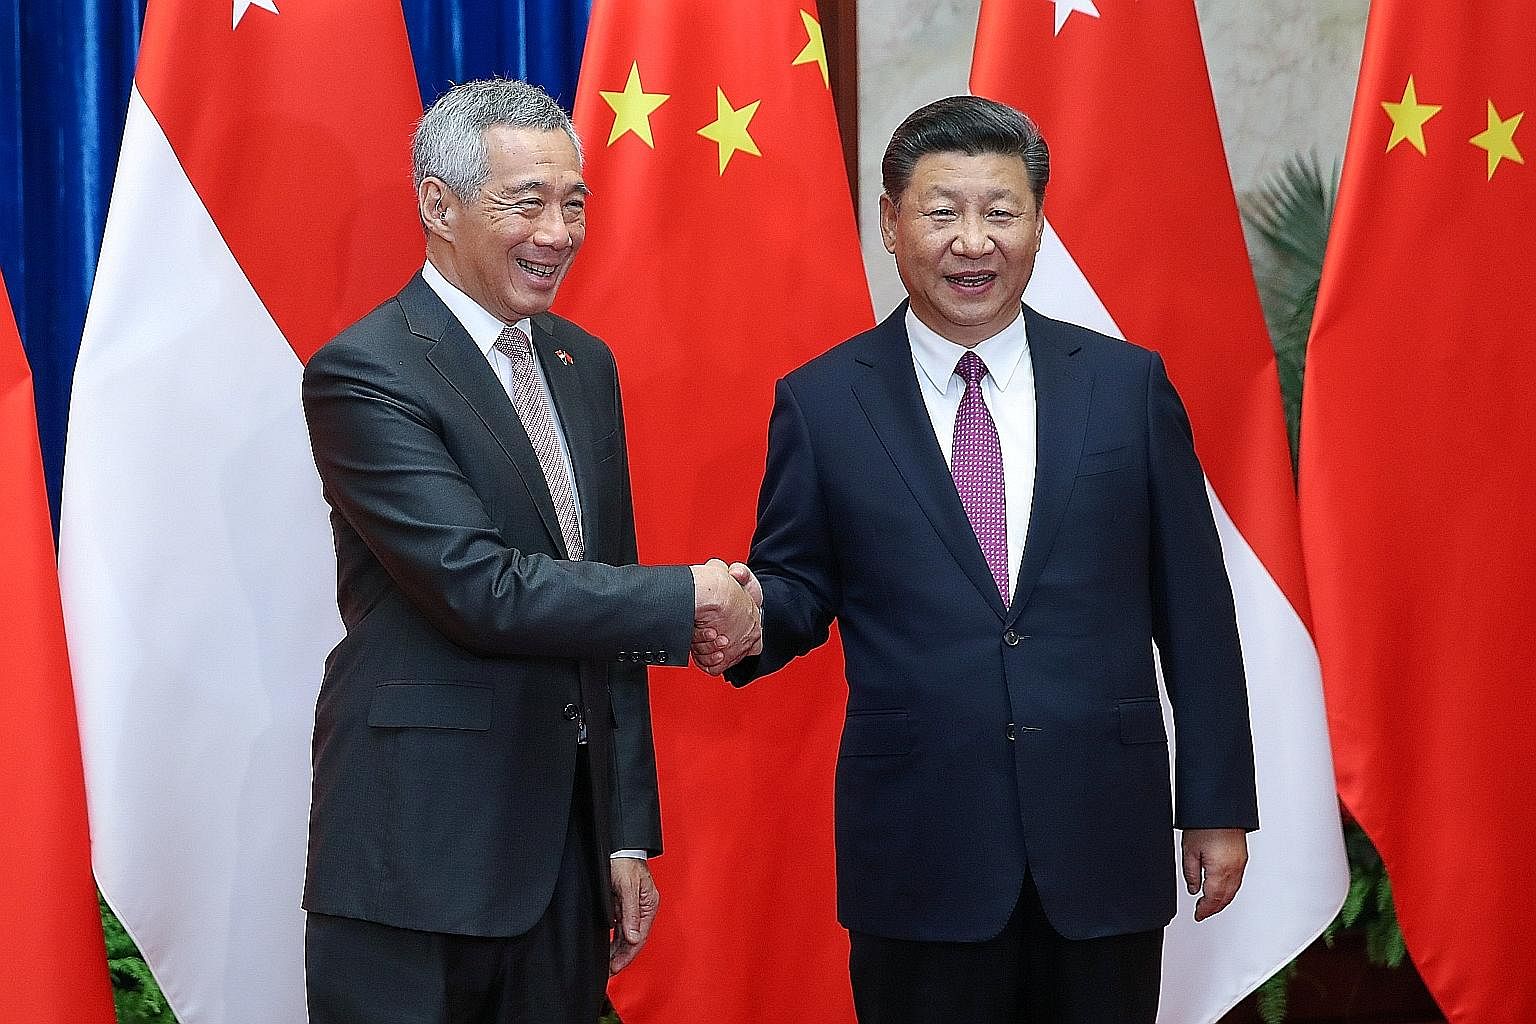 Prime Minister Lee Hsien Loong with Chinese President Xi Jinping before a meeting at The Great Hall Of The People in Beijing on Sept 20. Singapore's ties with China improved after PM Lee's meeting with President Xi and three other members of the apex